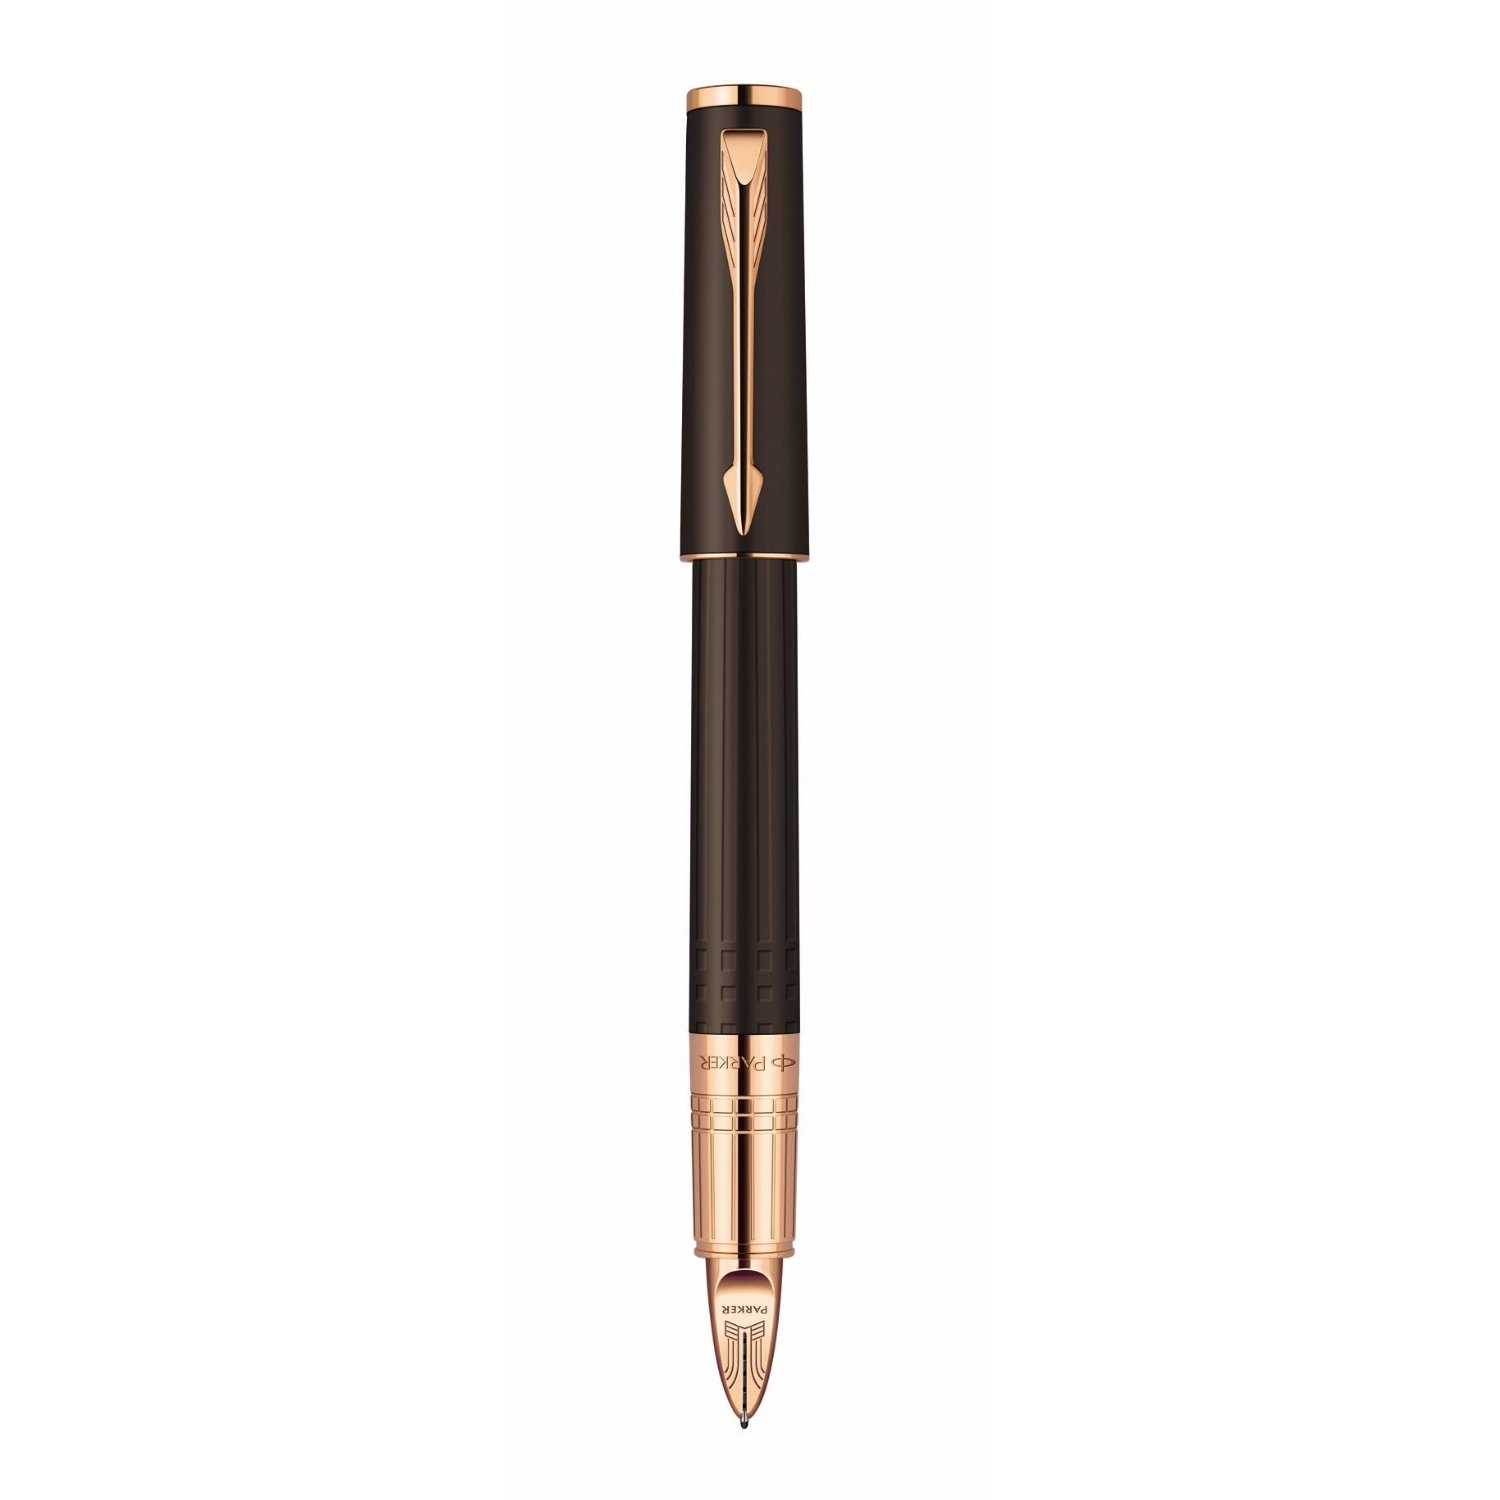 Parker Ingenuity Small Daring Brown Rubber with Pink Gold Trim (PGT) 5th Technology Mode Pen (S0959130)  $126.95 